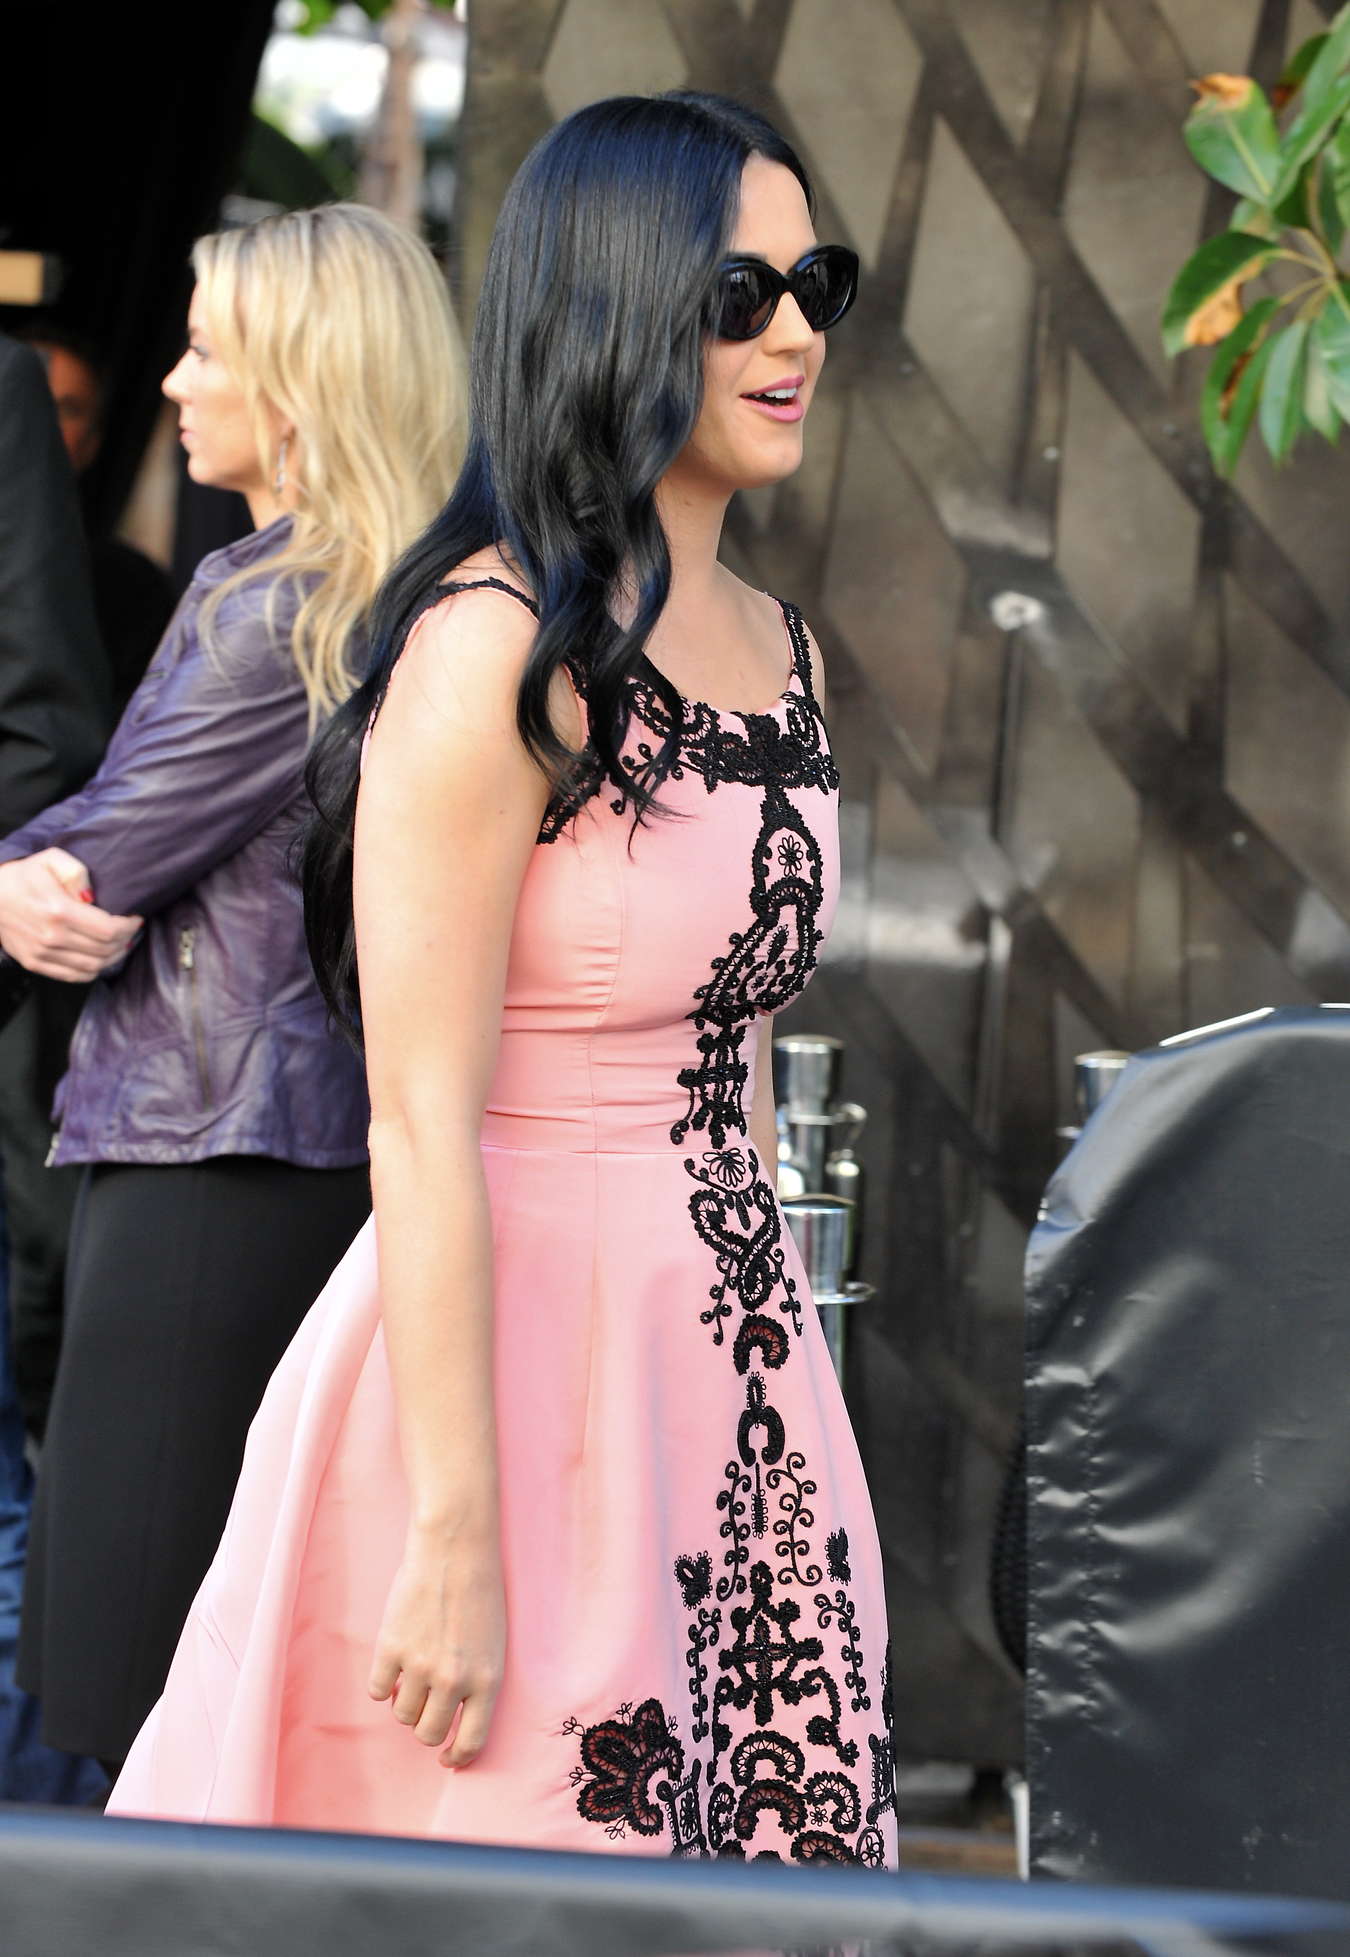 Katy Perry Arrives at a Private Party in Hollywood-06 – GotCeleb